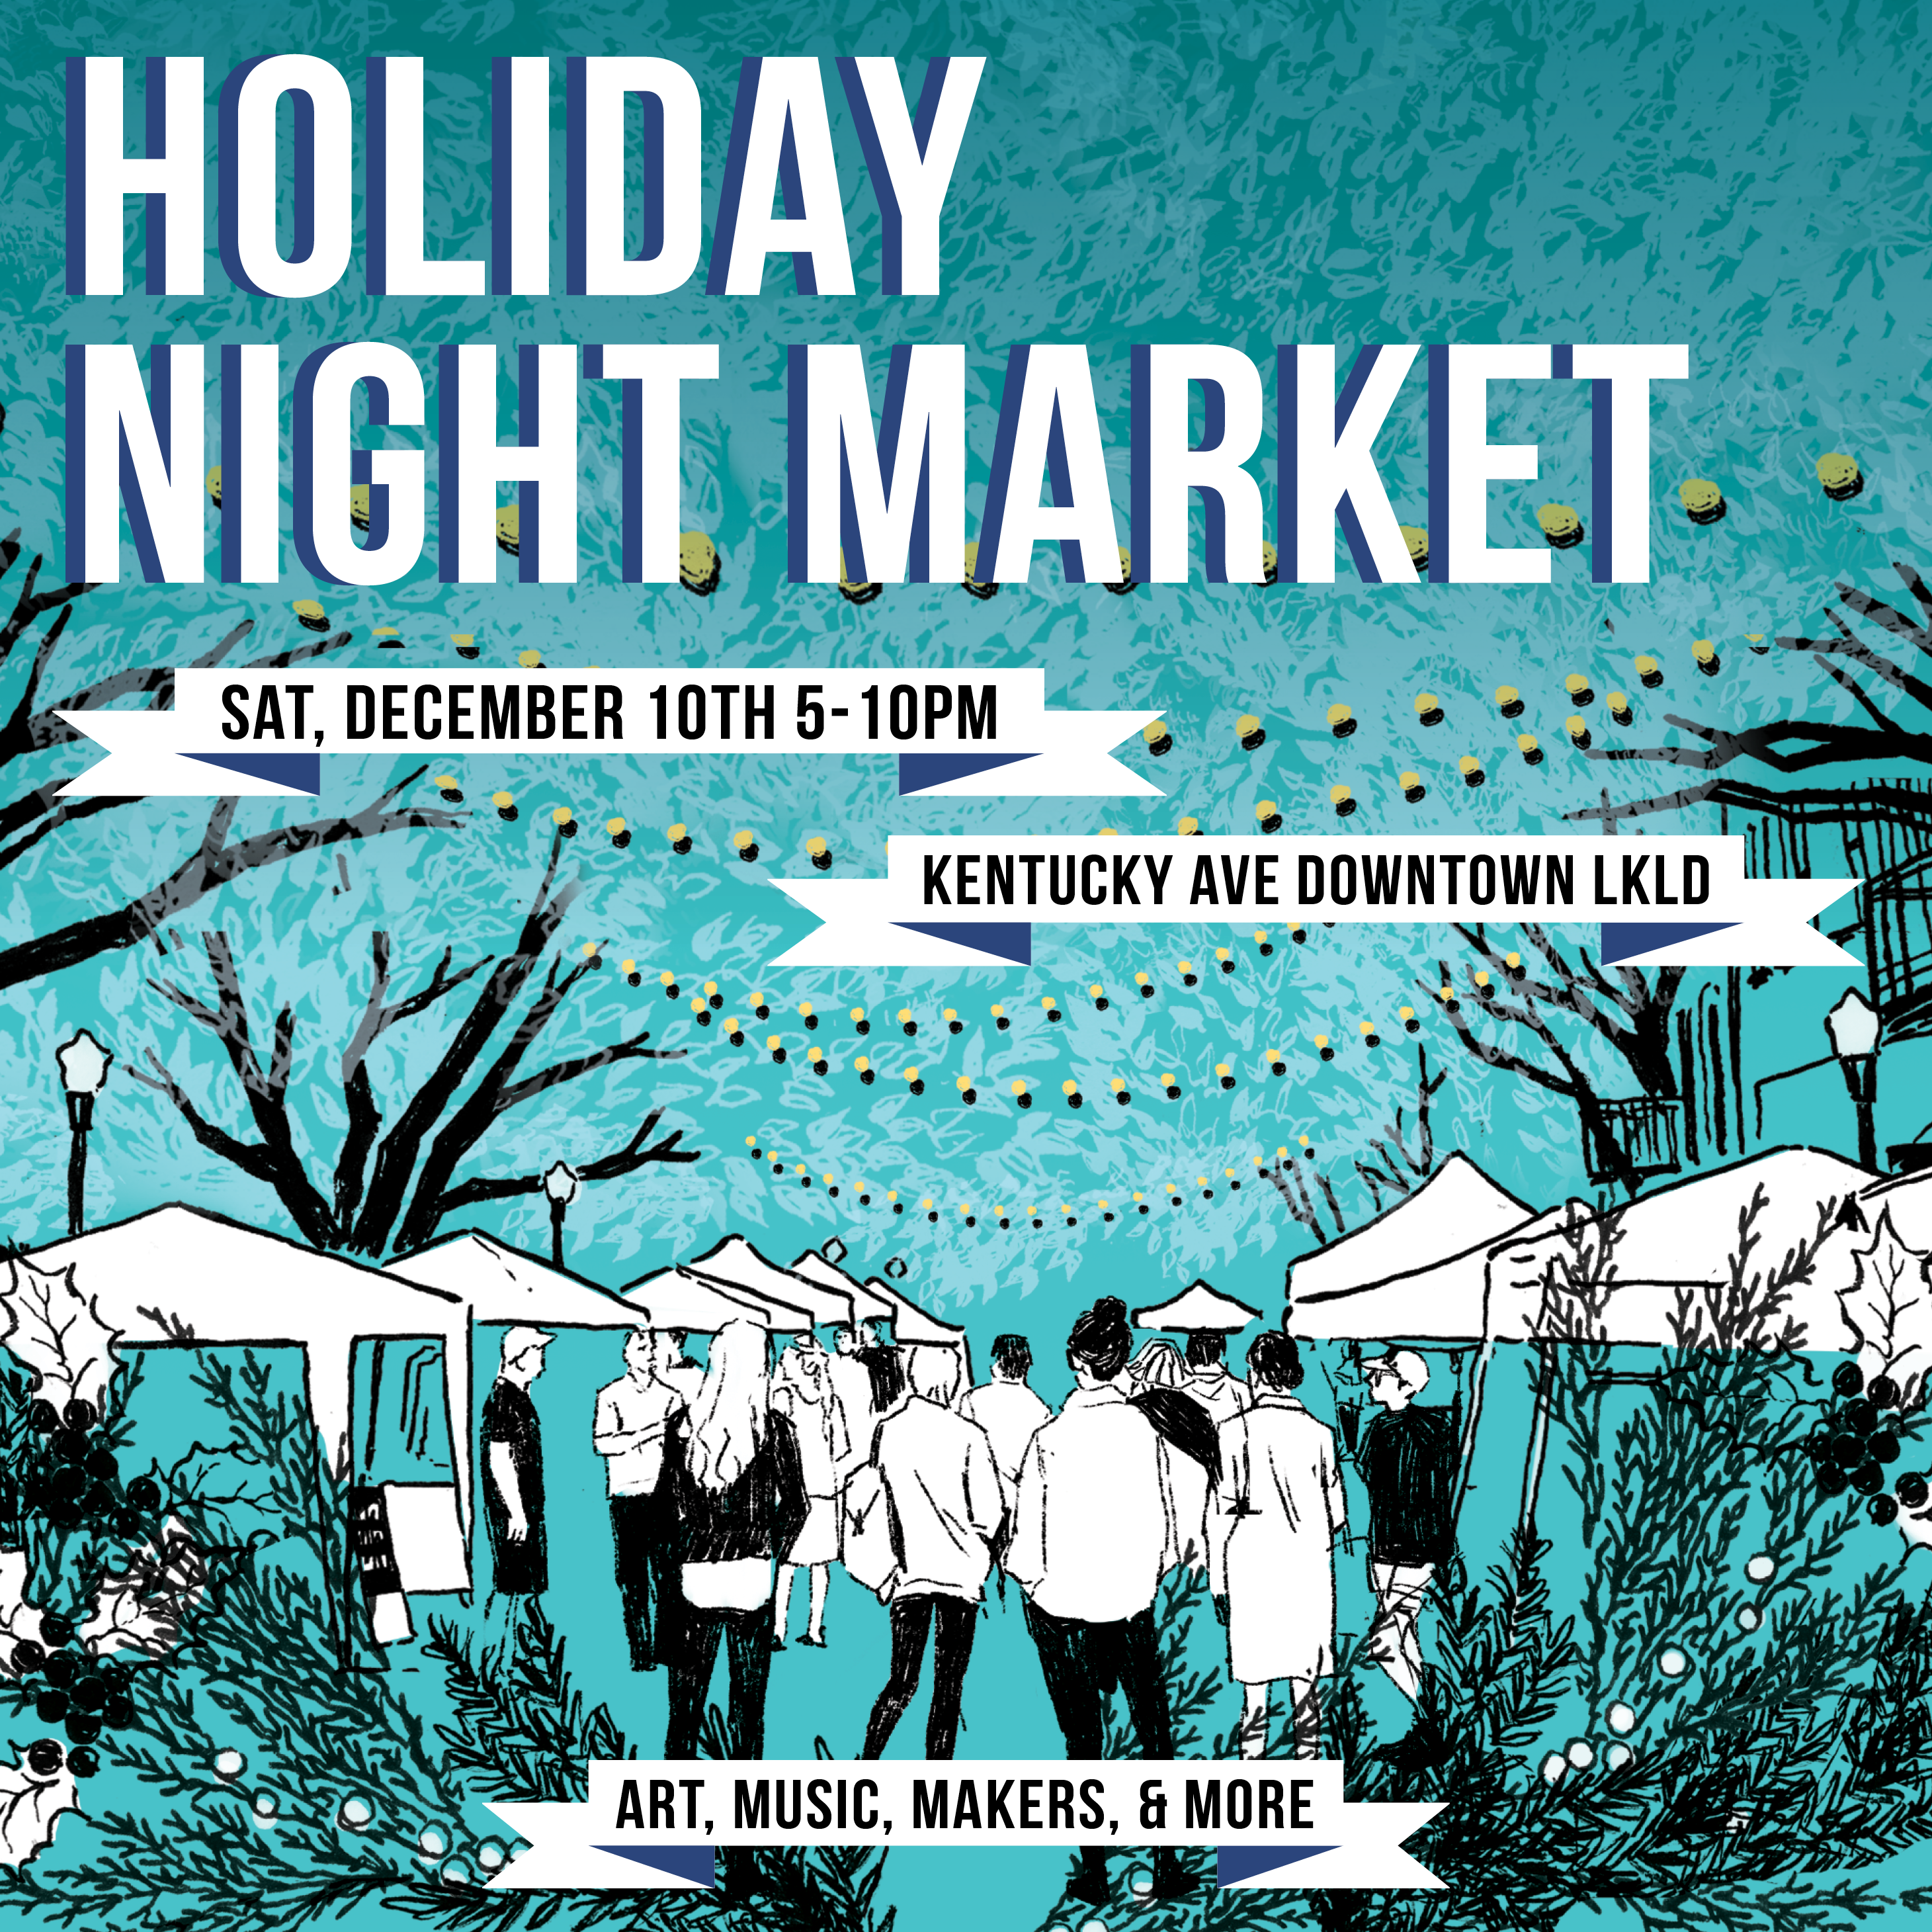 Downtown Lakeland presents: Holiday Night Market! Join us for a holiday blowout featuring FOUR unique market experiences curated by Downtown Lakeland, Buena Market, Lakeland Punk Flea, and Art Crawl! · 100+ creatives, artists, and makers · Live music and DJ sets and performances · Extended hours offered by downtown retailers · Specialty food and drinks from Lakeland’s best pop-ups